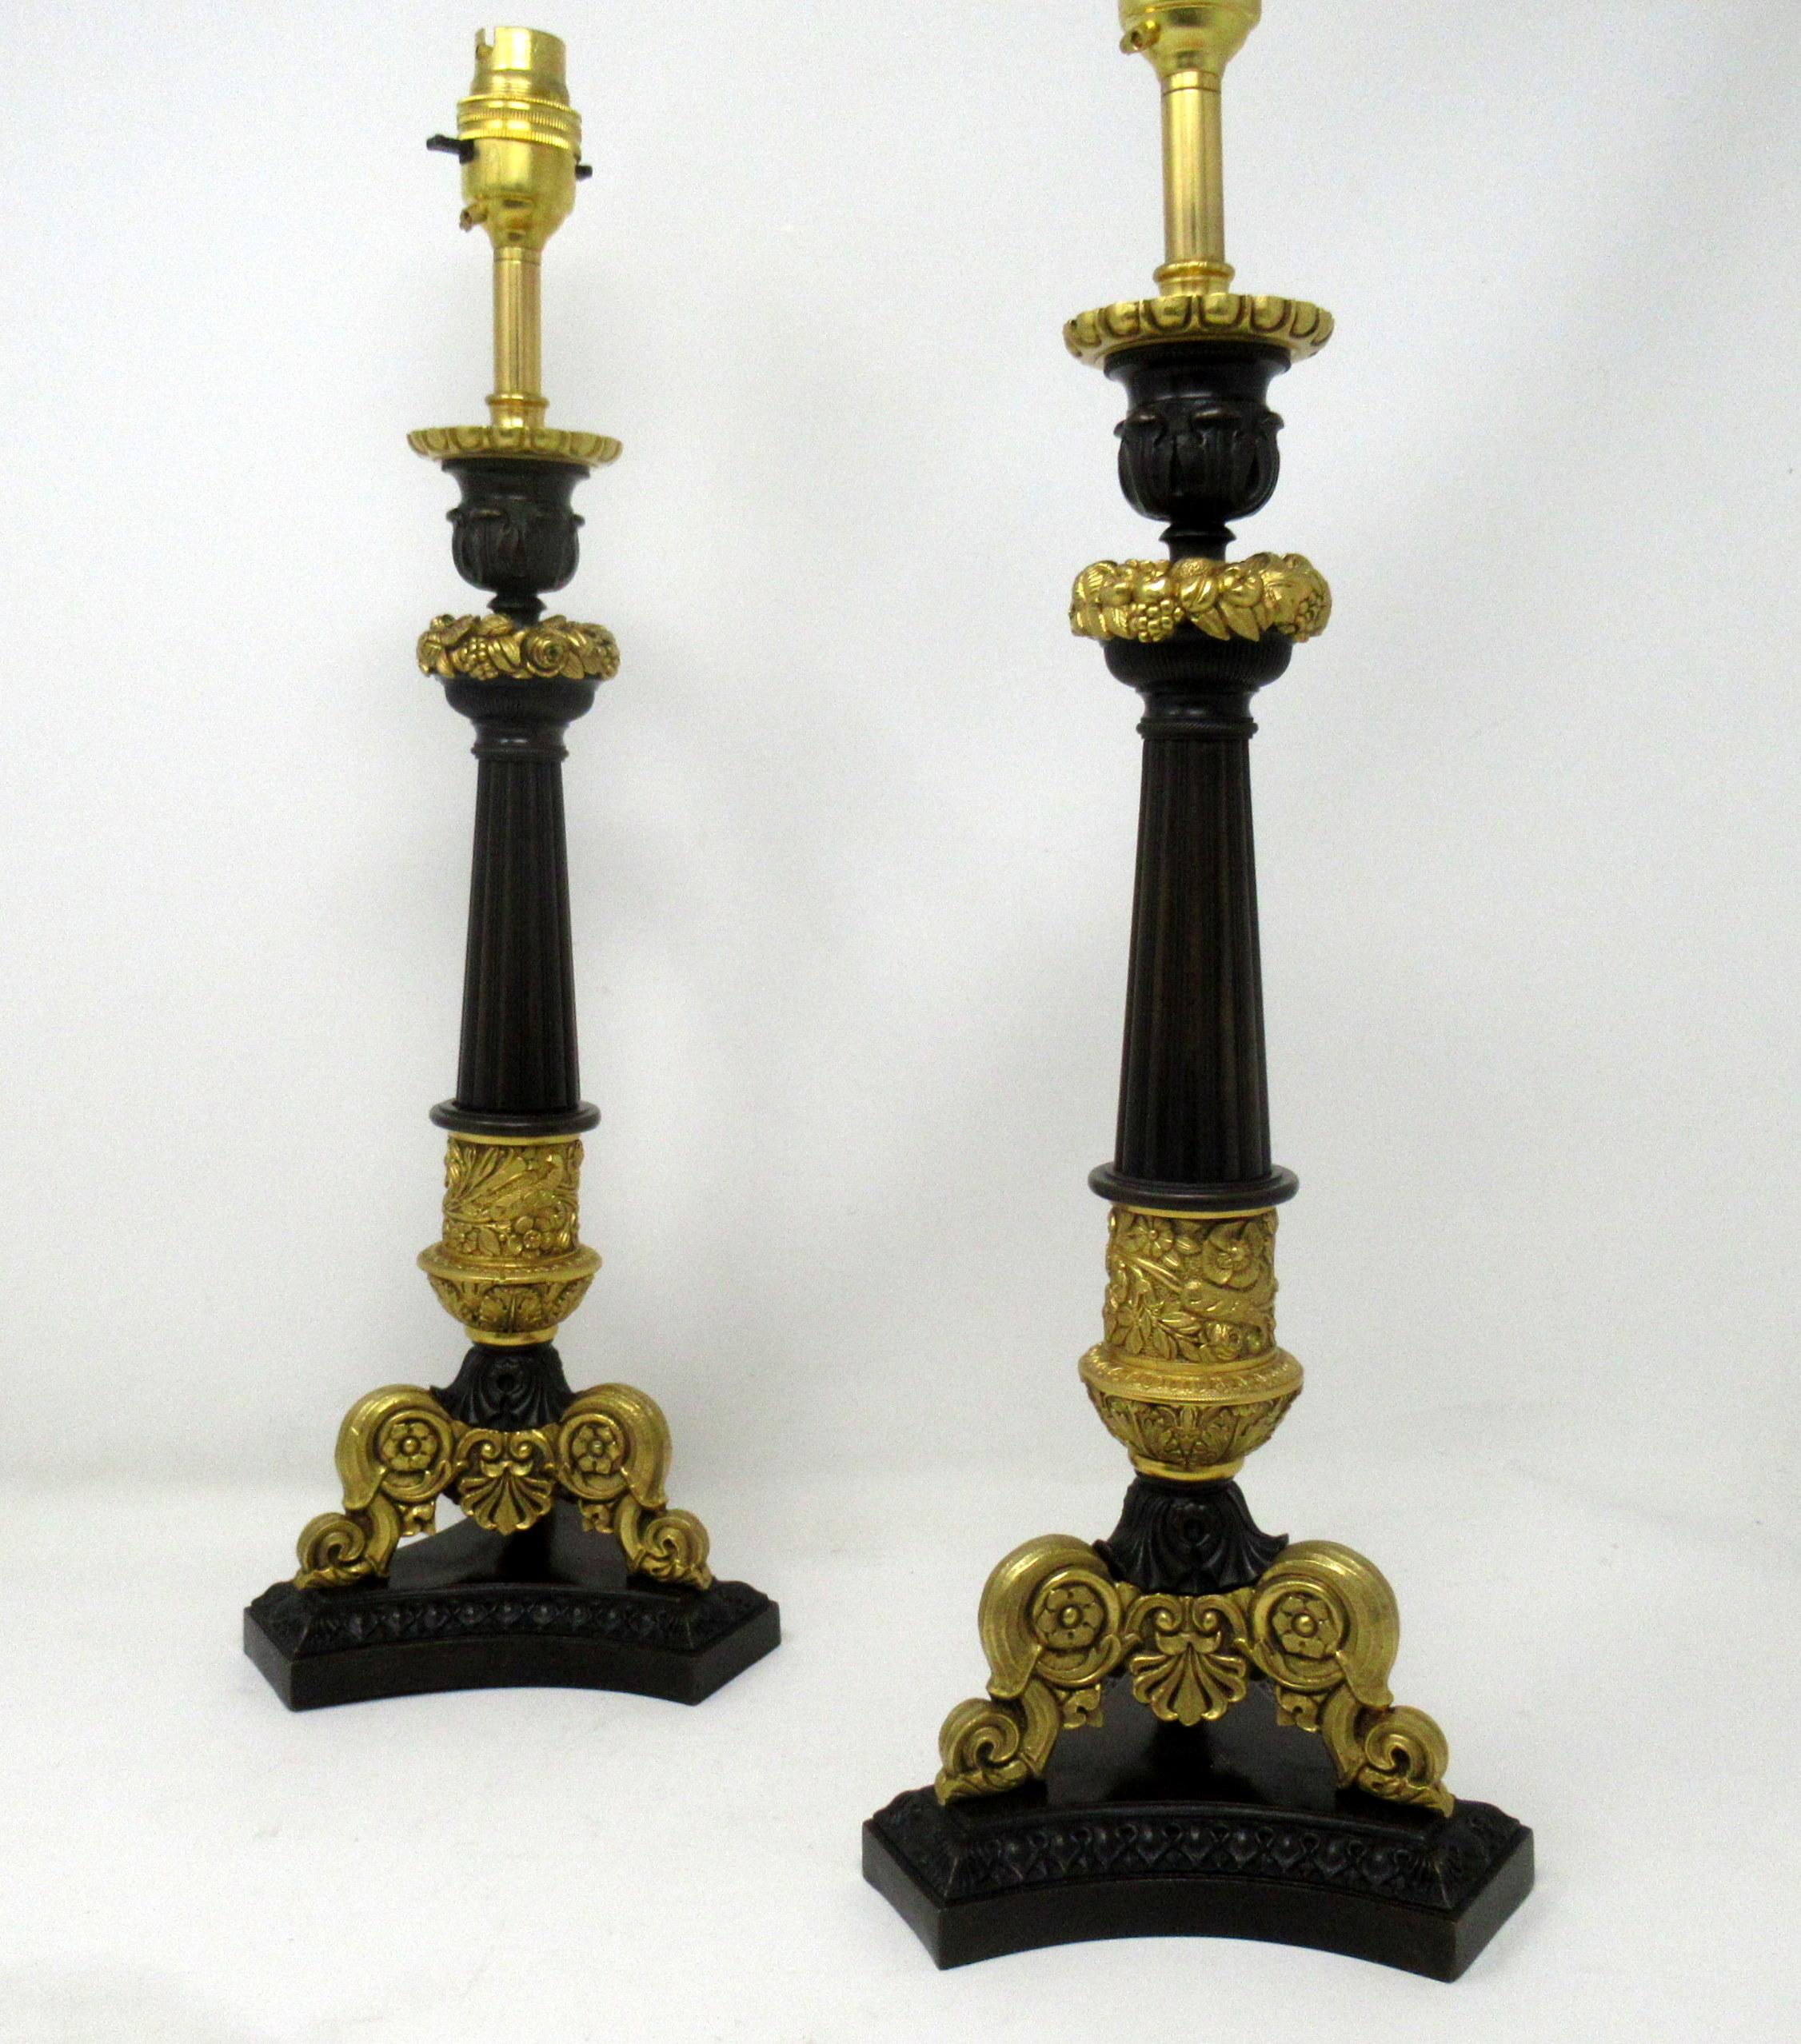 Stunning pair of French heavy gauge ormolu and bronze single light candlesticks, now converted to electric table lamps, of nice tall proportions, each concave tri-form base raised on foliate cast shell feet. The finely cast urn formed nozzles with